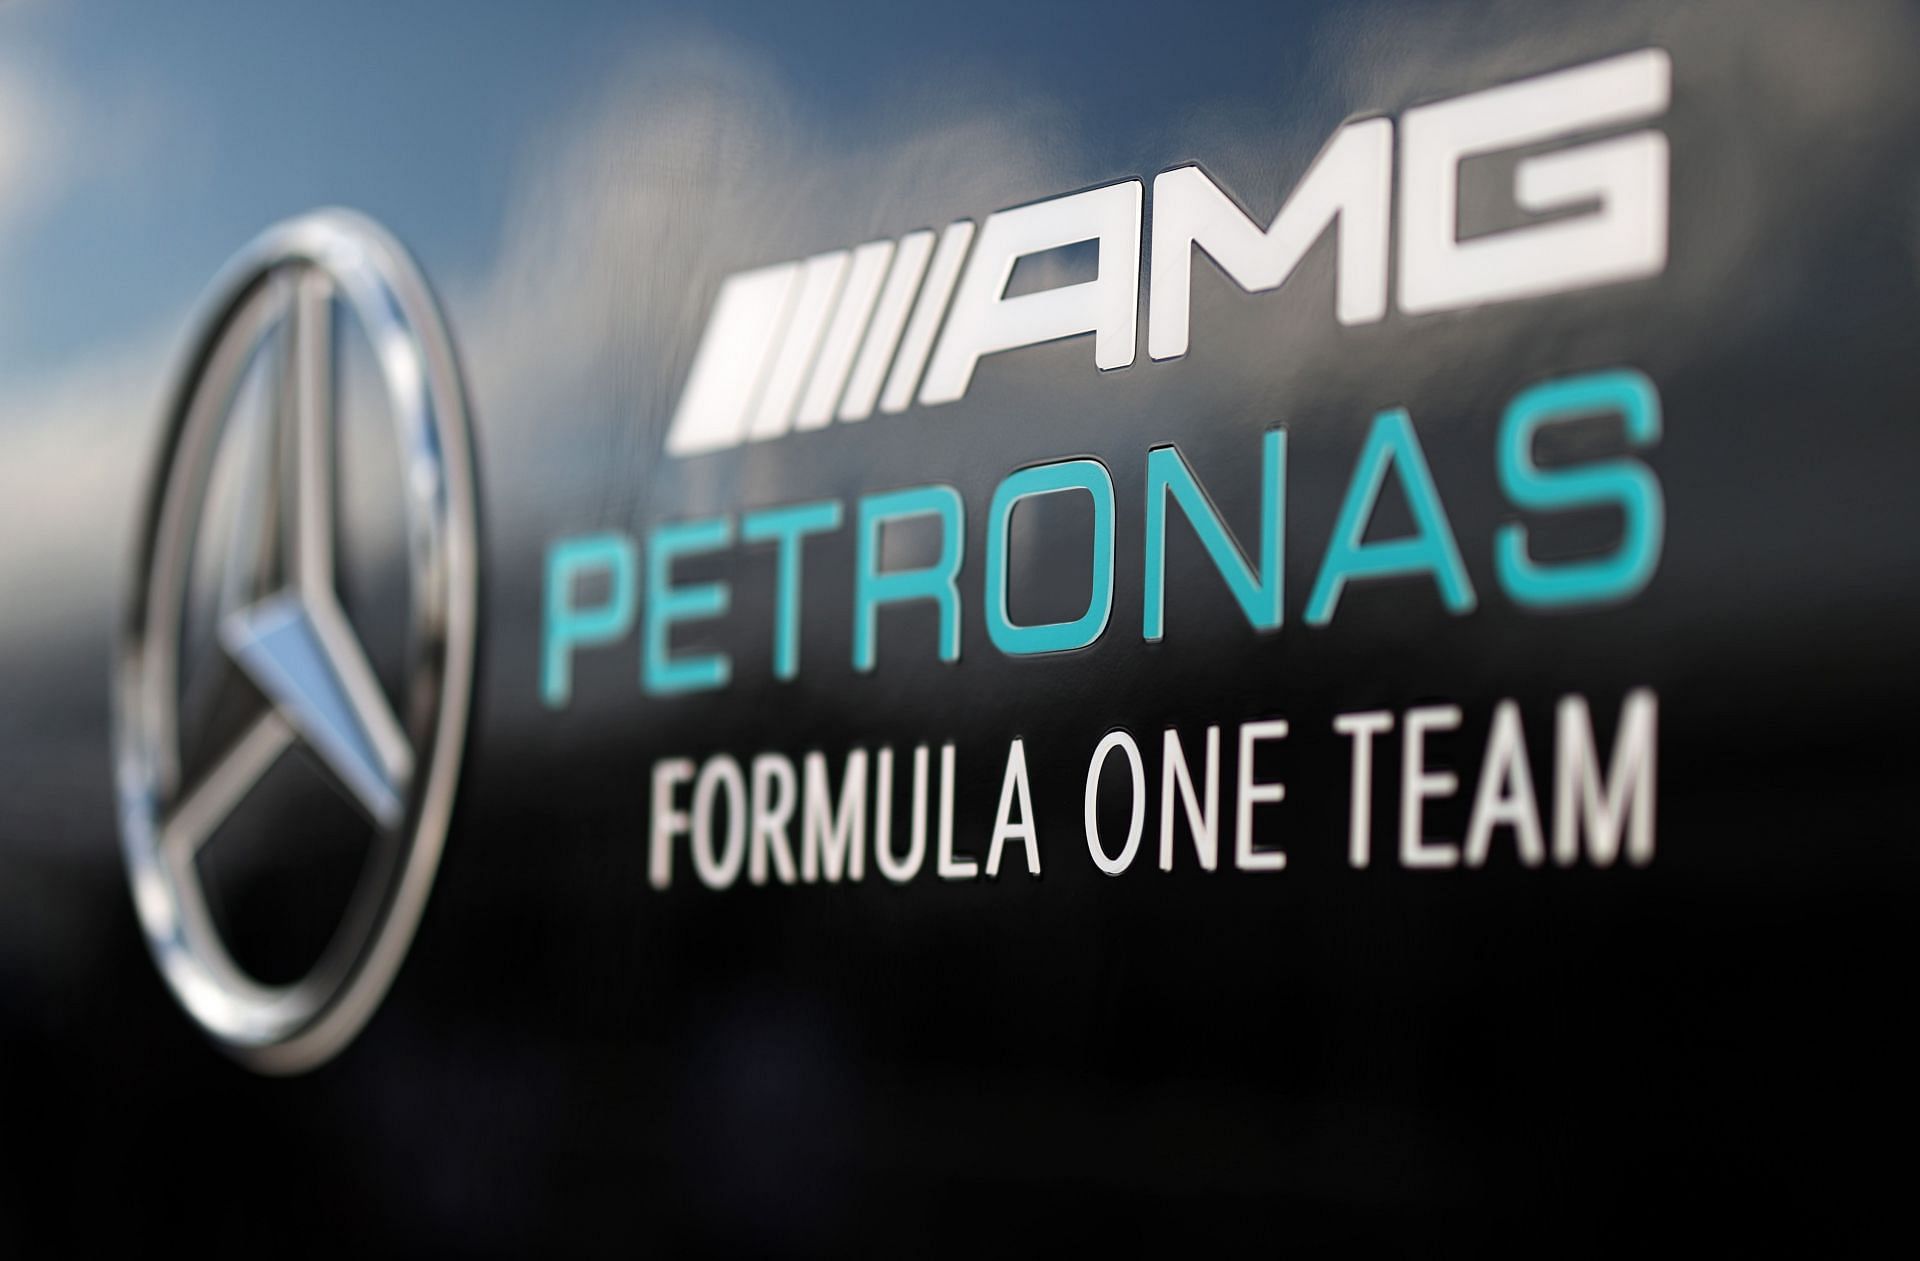 The Mercedes GP logo in theF1 paddock. (Photo by Chris Graythen/Getty Images)